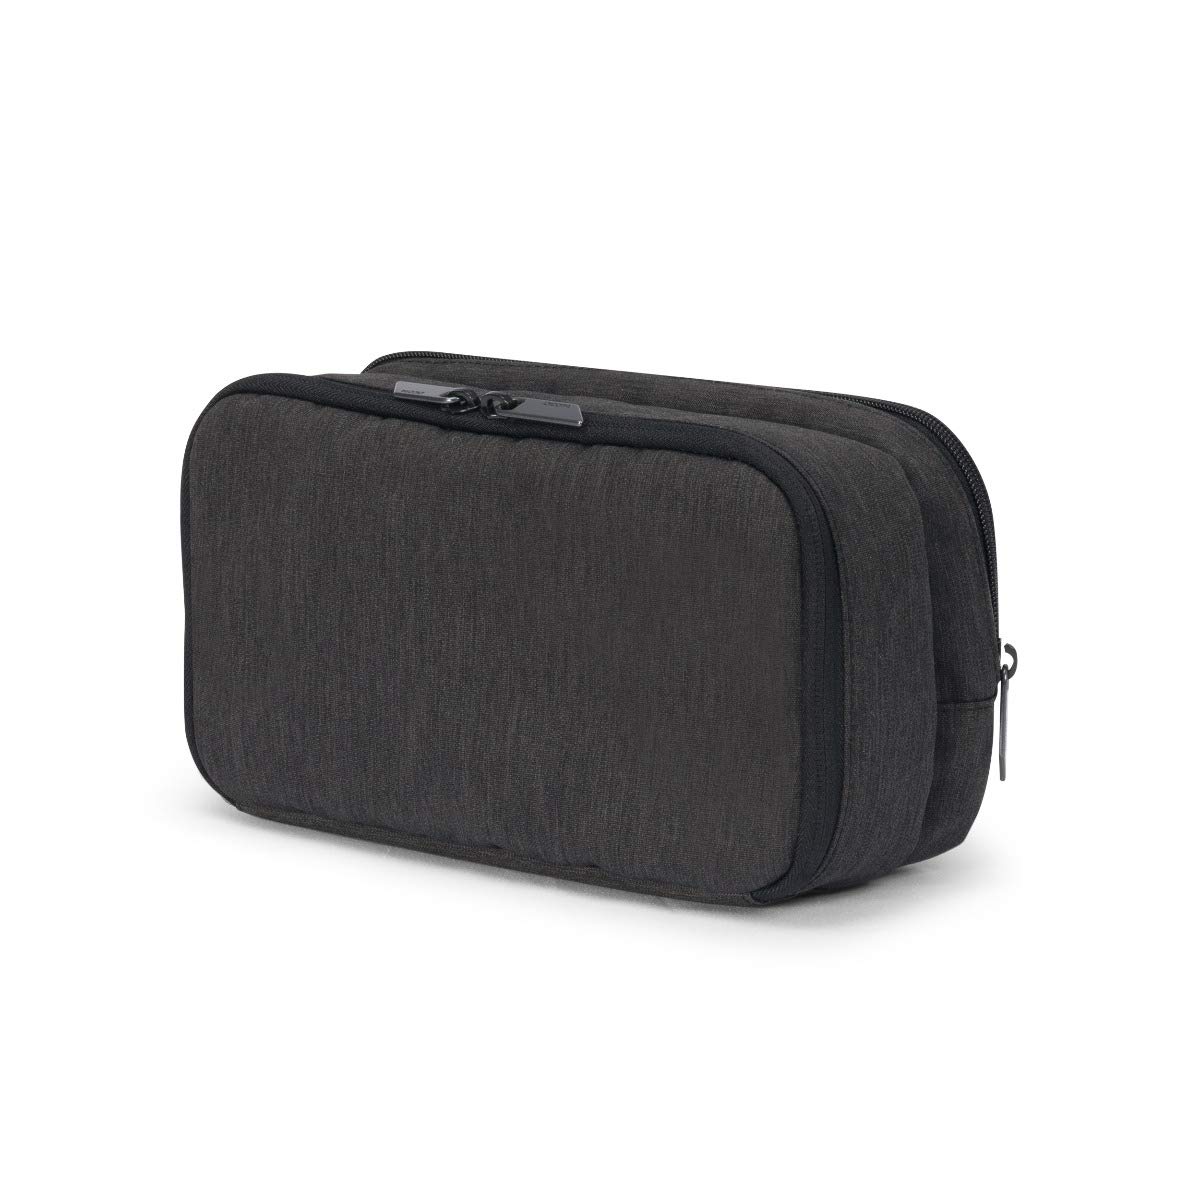 DICOTA Accessories Pouch STYLE (D31495)